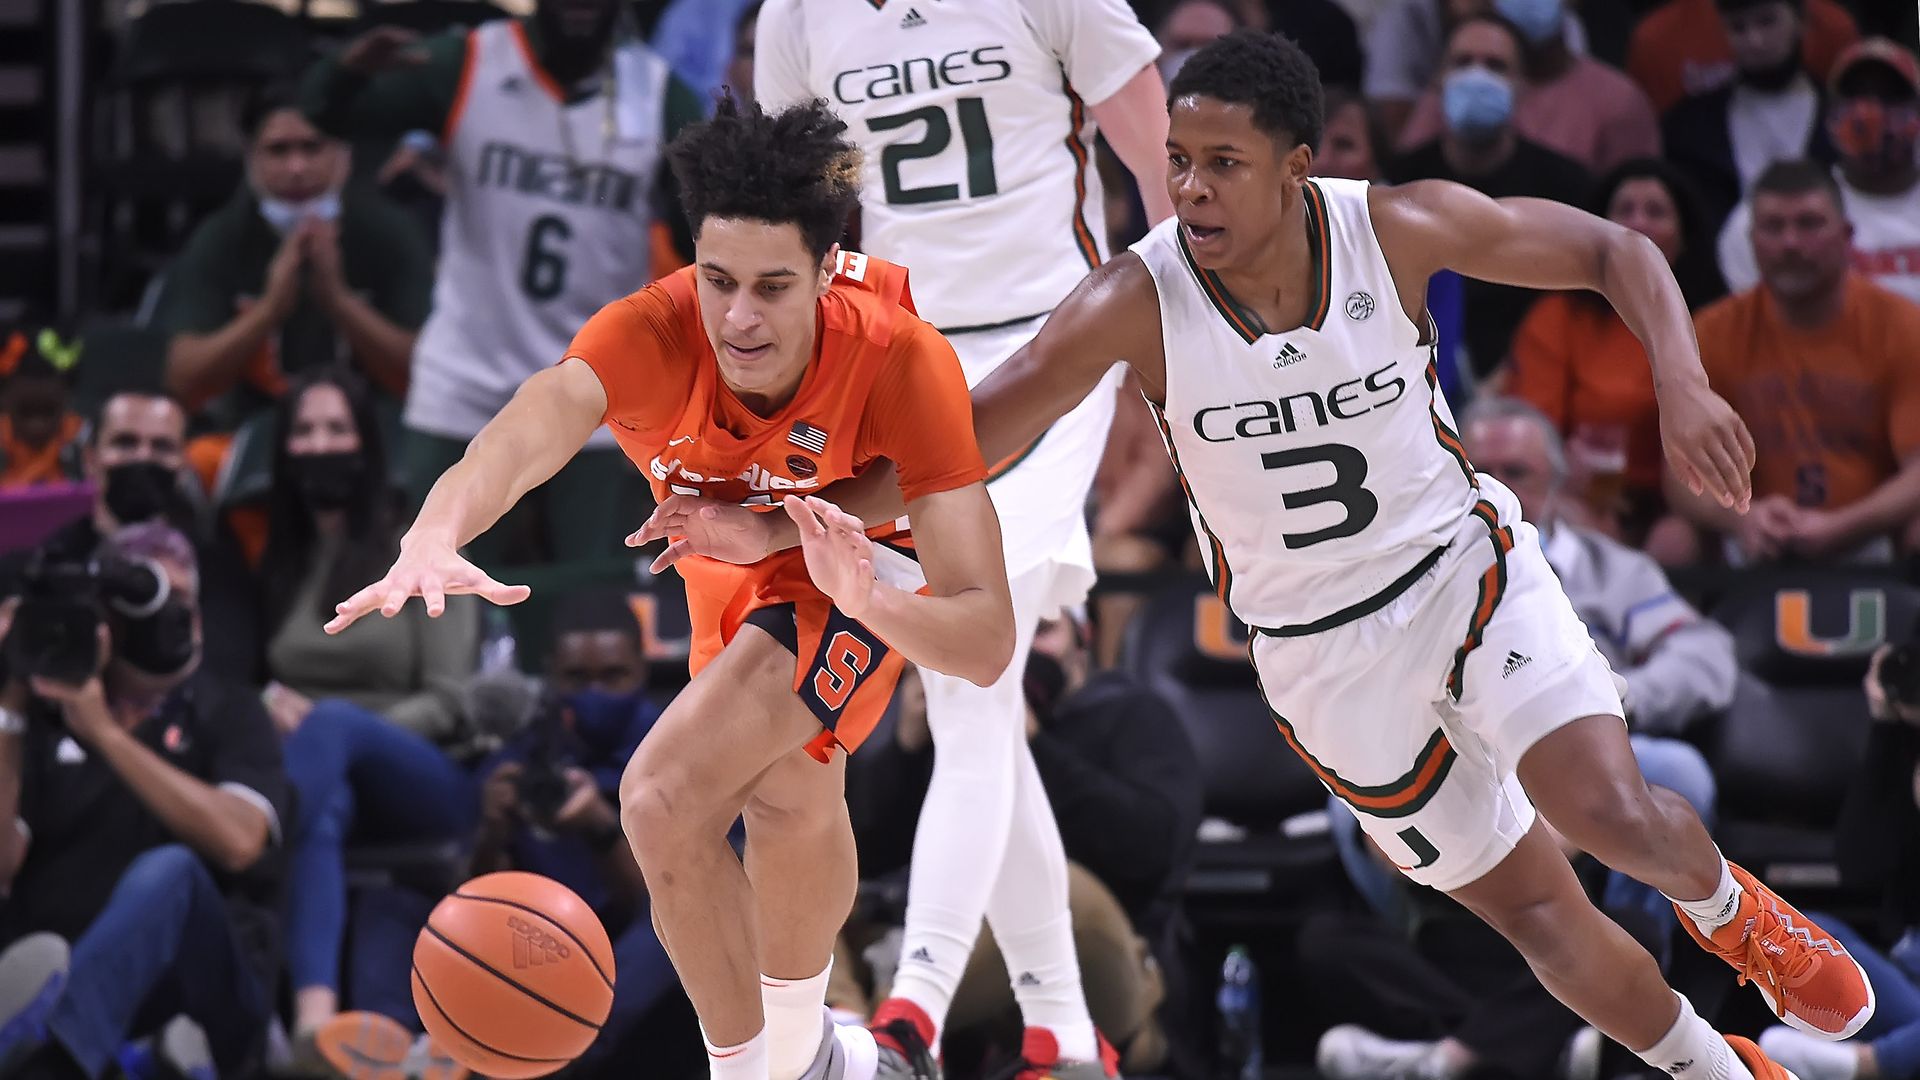 Two basketball players. One plays for Miami the other plays for Syracuse.